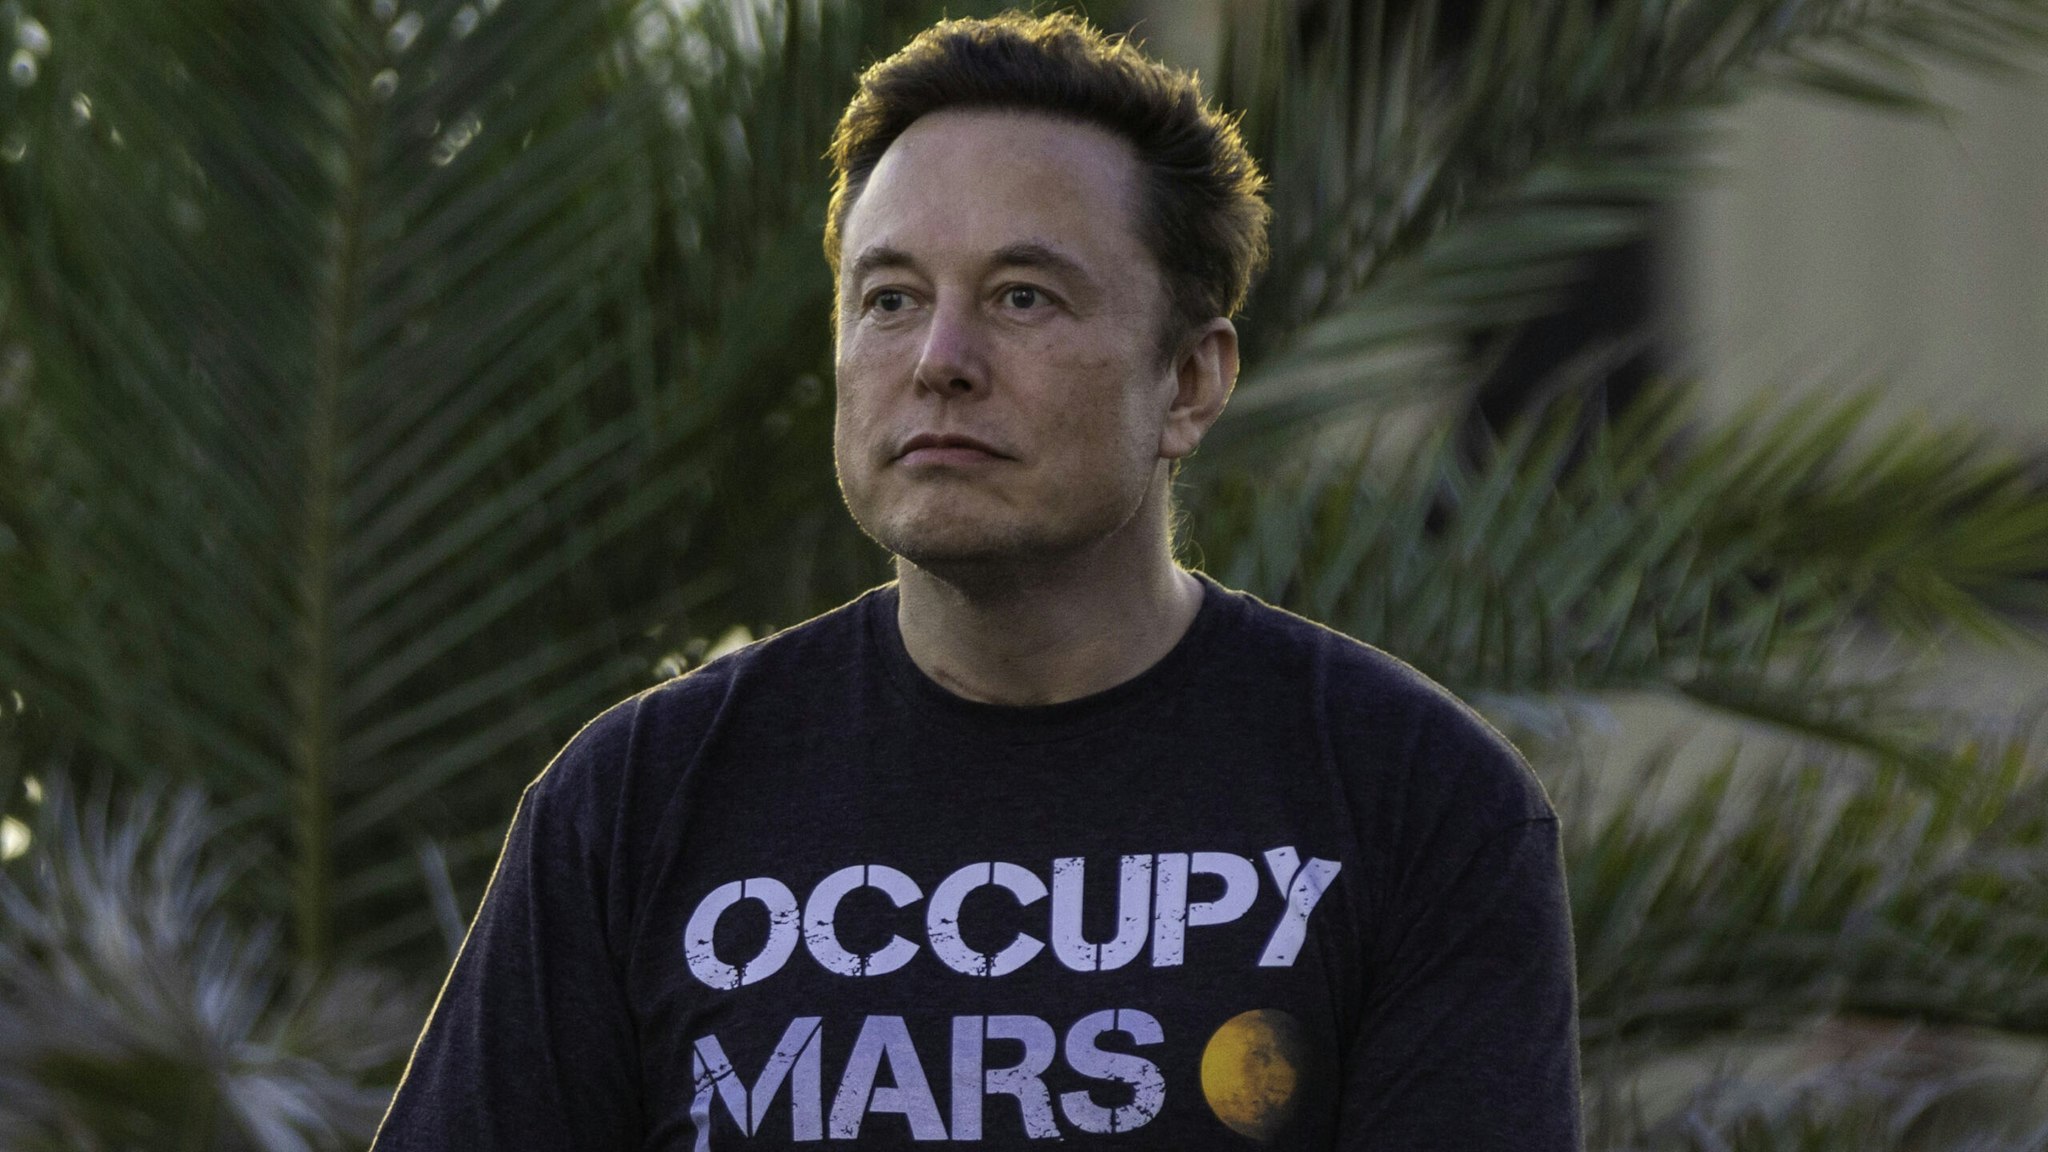 BOCA CHICA BEACH, TX - AUGUST 25: SpaceX founder Elon Musk during a T-Mobile and SpaceX joint event on August 25, 2022 in Boca Chica Beach, Texas. The two companies announced plans to work together to provide T-Mobile cellular service using Starlink satellites.